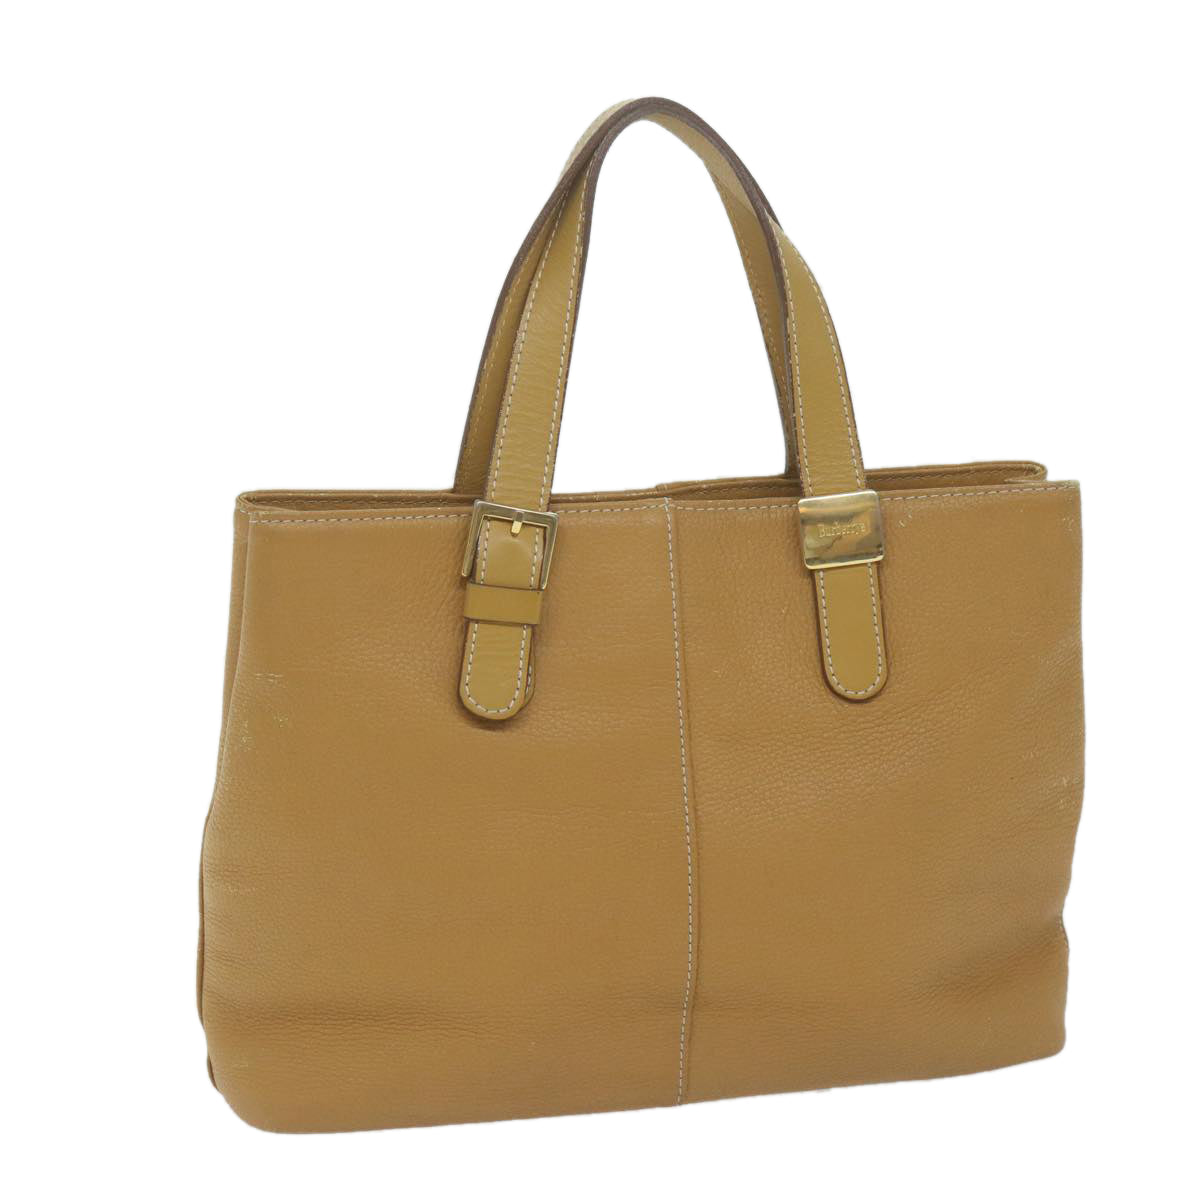 Burberrys Tote Bag Leather Beige Auth fm3177